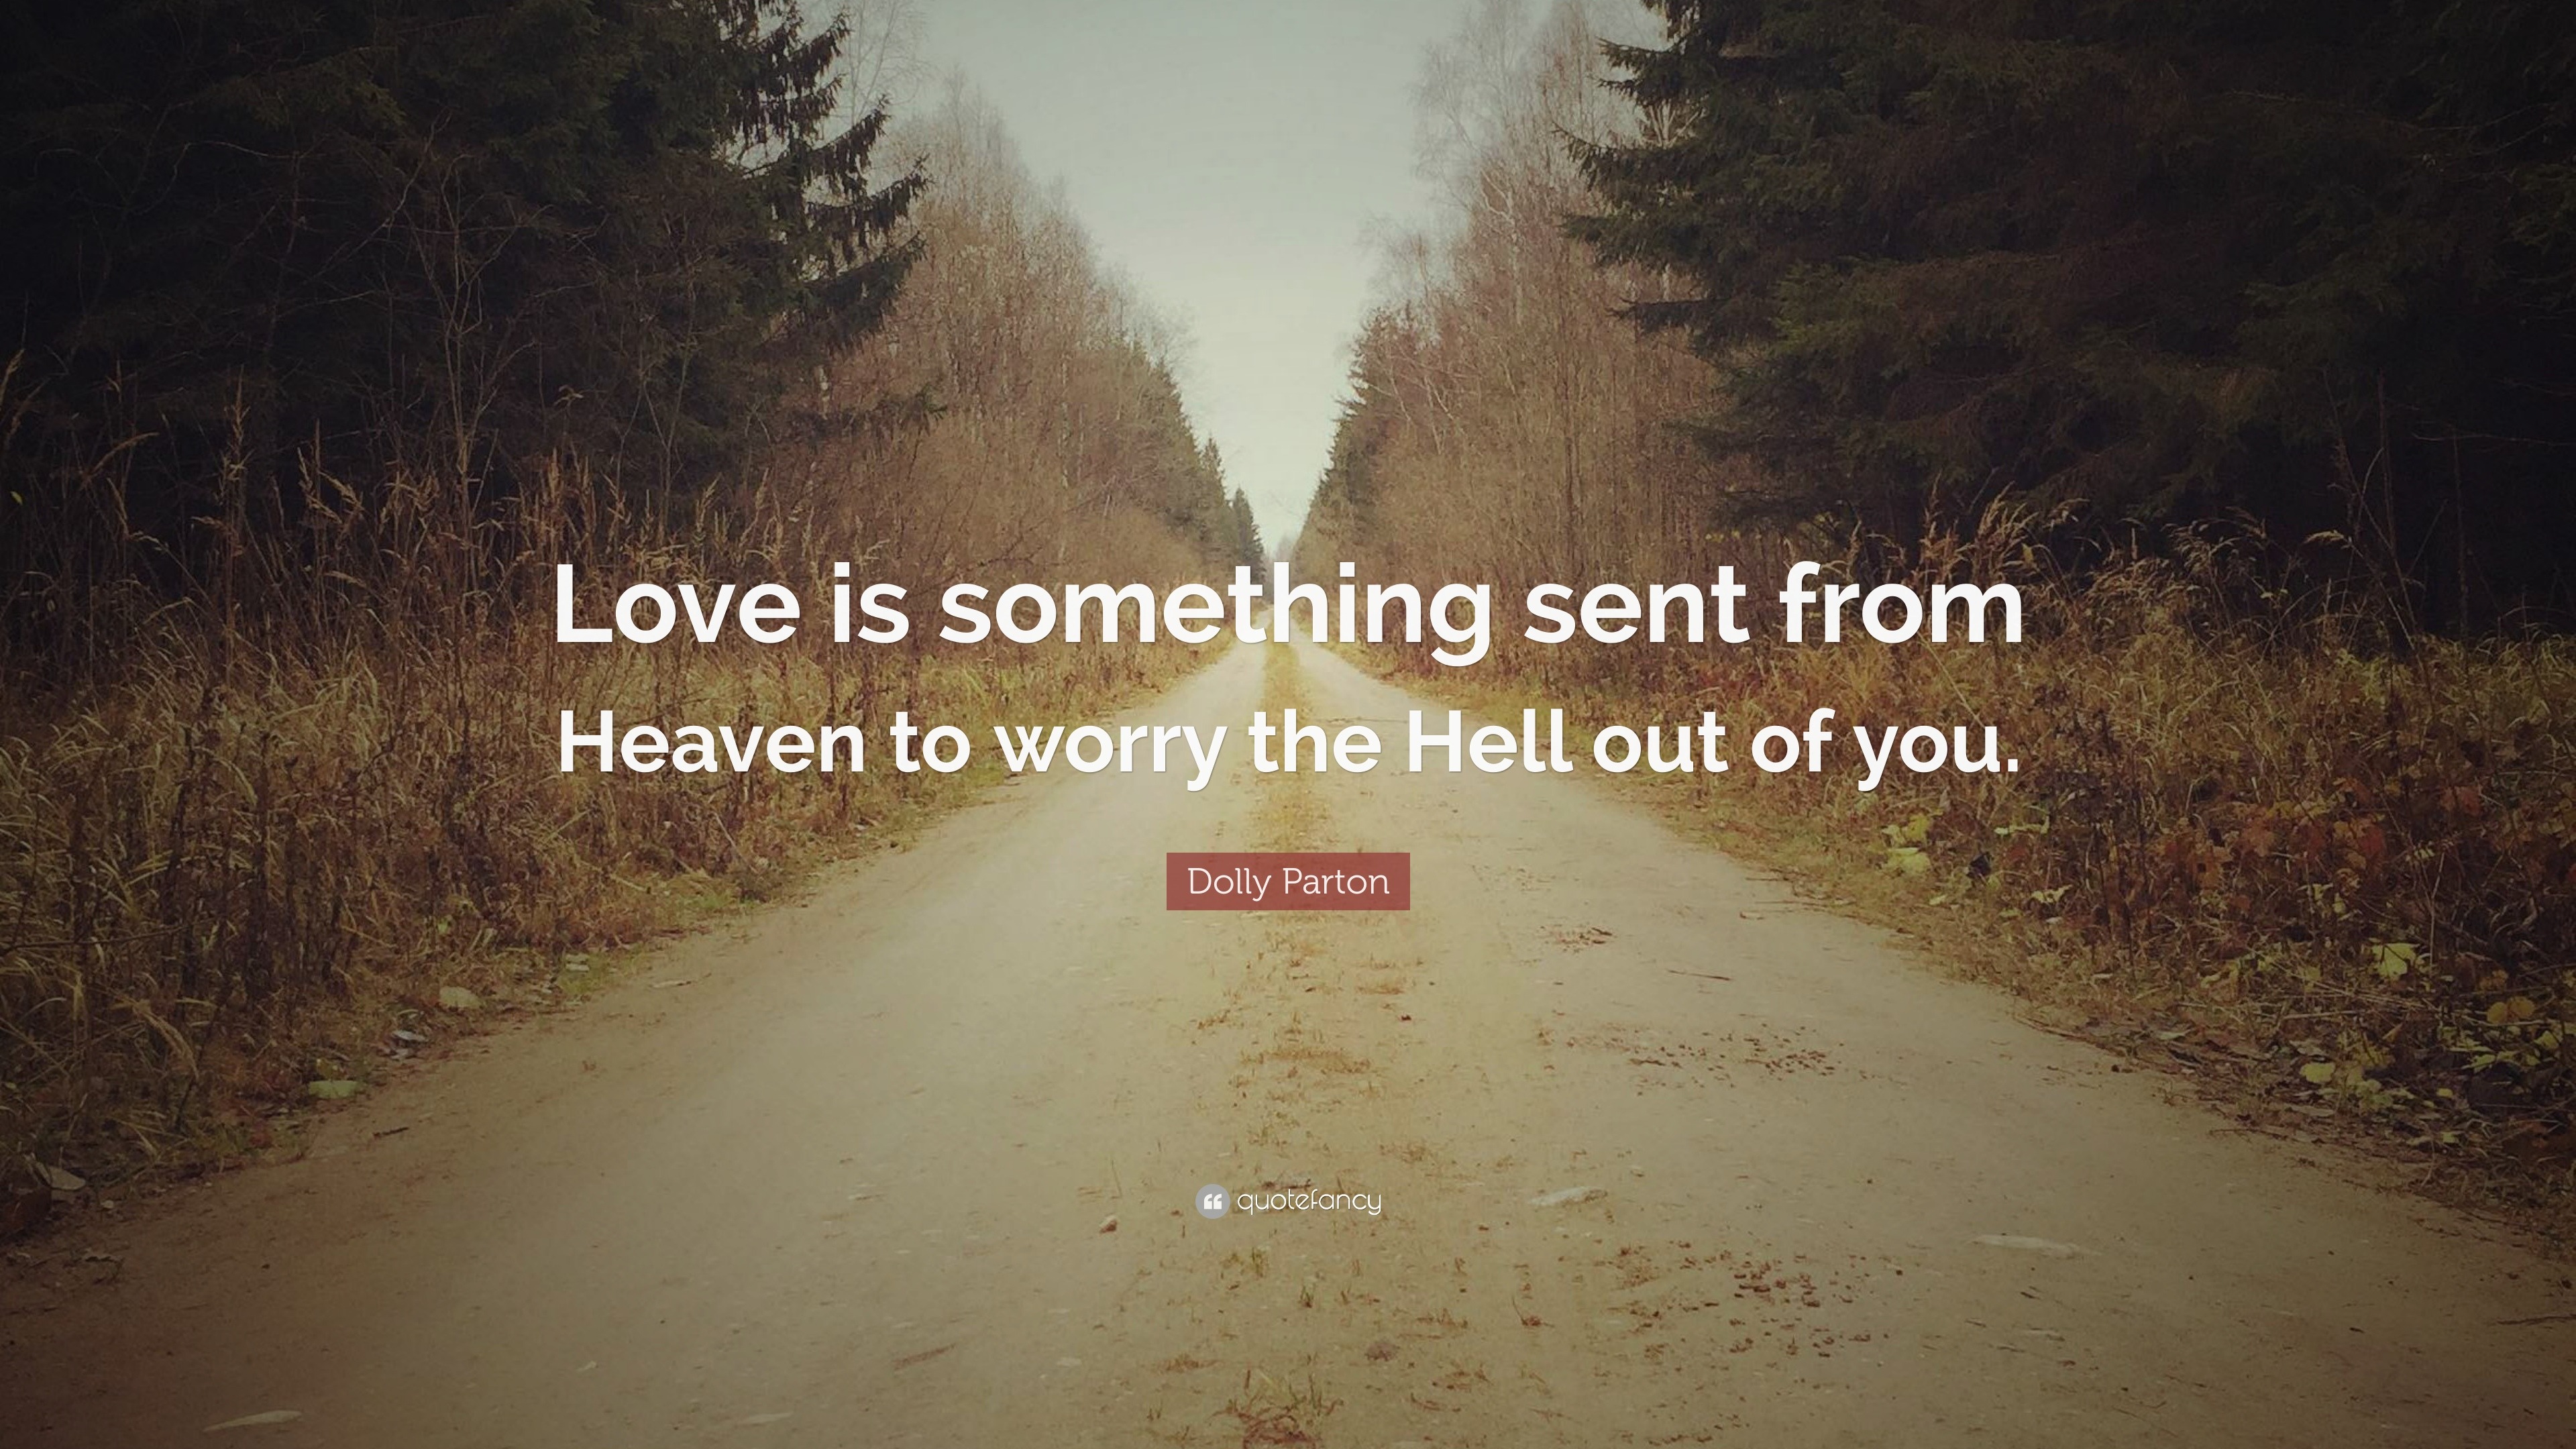 Dolly Parton Quote Love Is Something Sent From Heaven To Worry The Hell Out Of You 12 Wallpapers Quotefancy